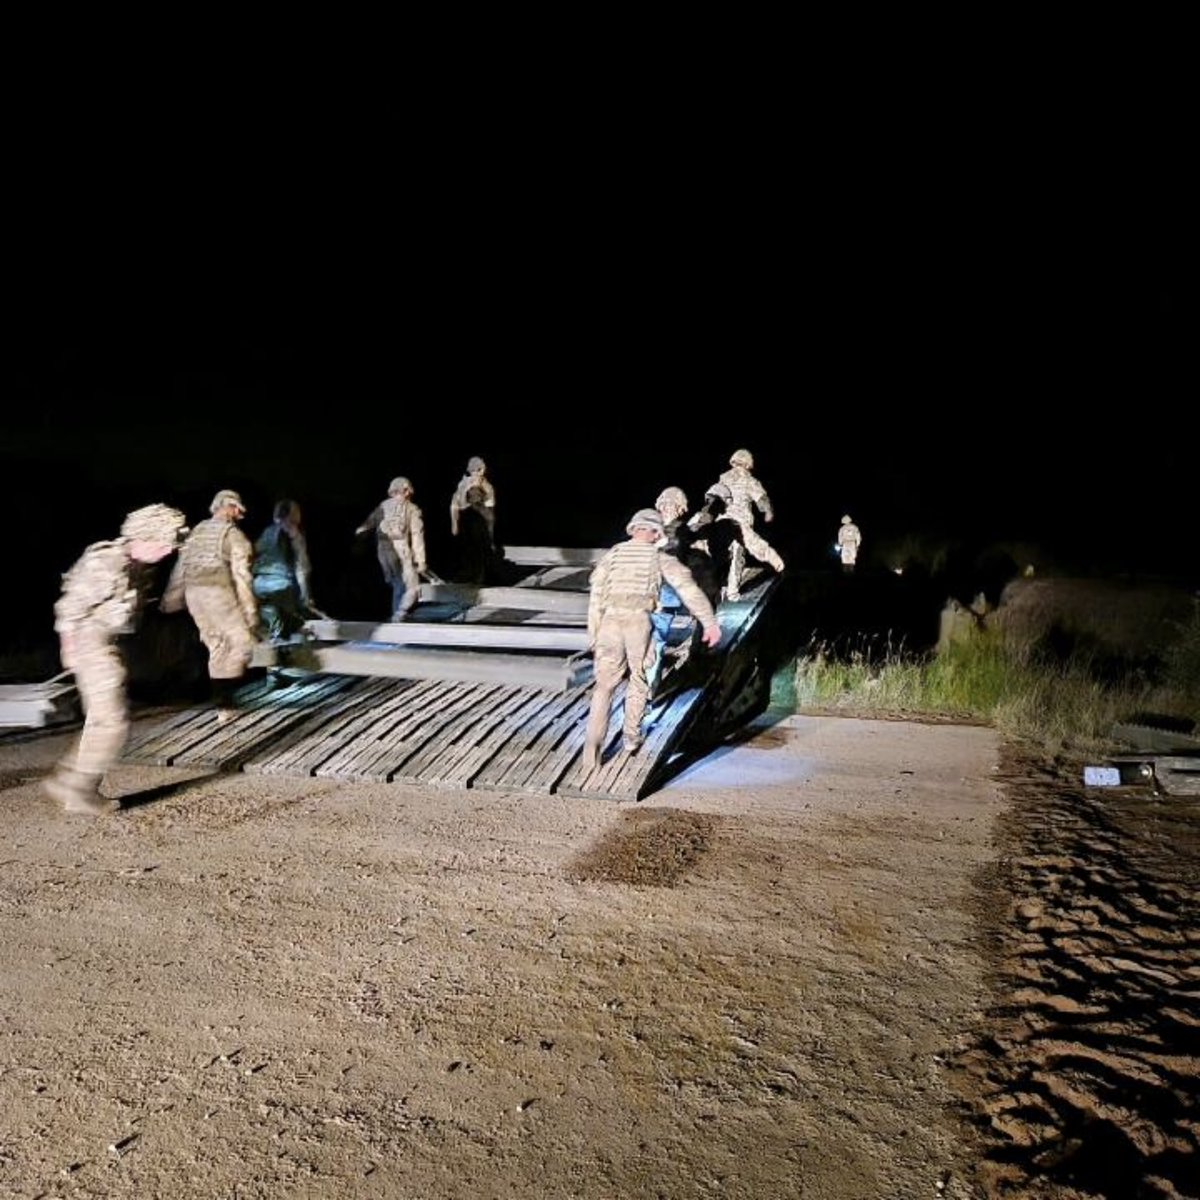 Our #Engineers keep the Army going, no matter what obstacle they face! Here we have our #SapperFamily from @33Armoured (@26EngineerRegt) who recently improved their skills in building a 12 bay double storey bridge! Great work! 💪 #SapperSmart #Ubique